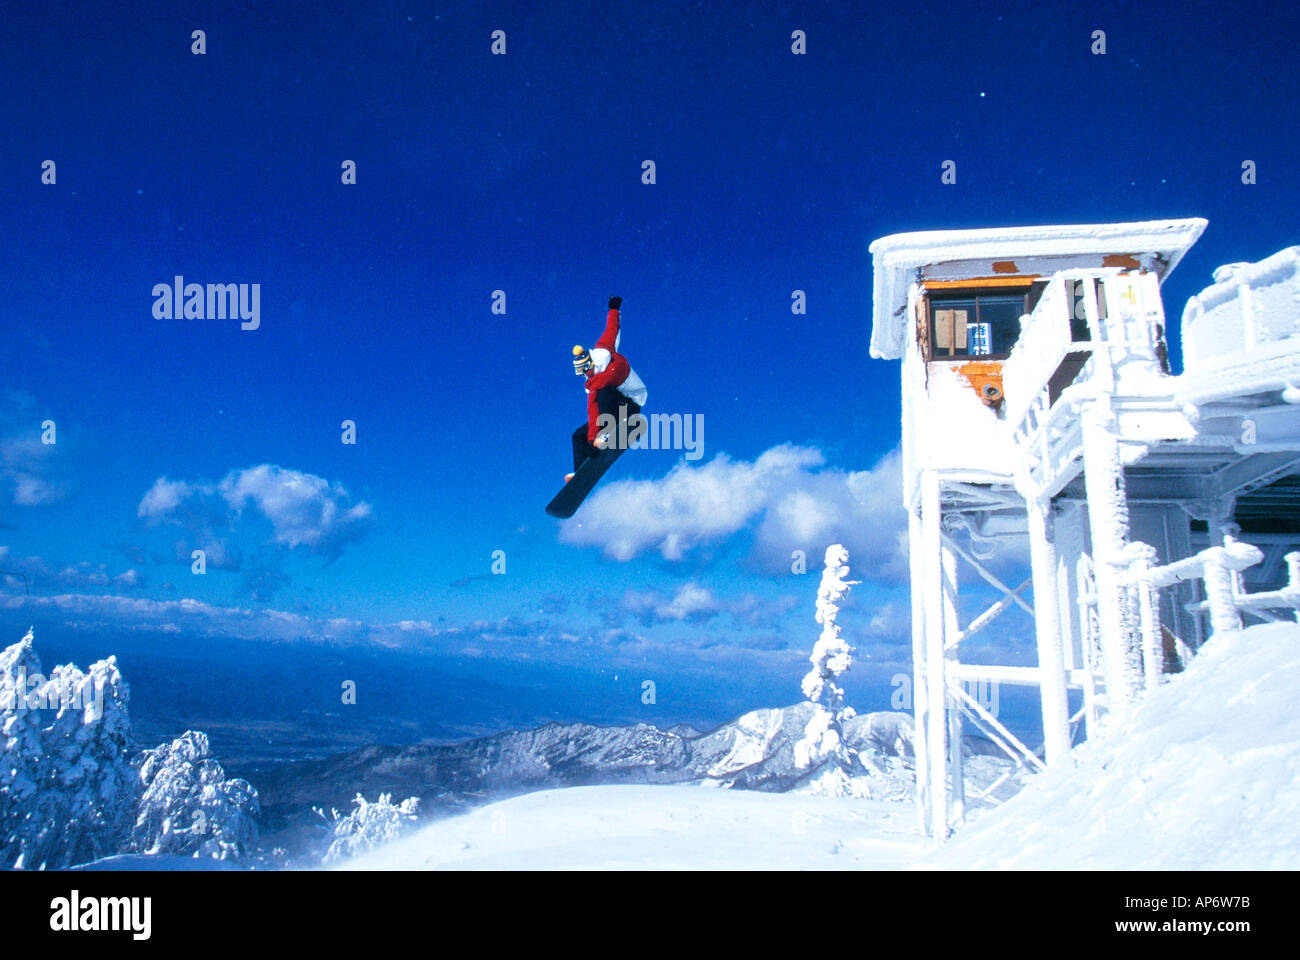 Mid-air snowboard action, jumping from chairlift, Stuart Brass, Japan Stock Photo